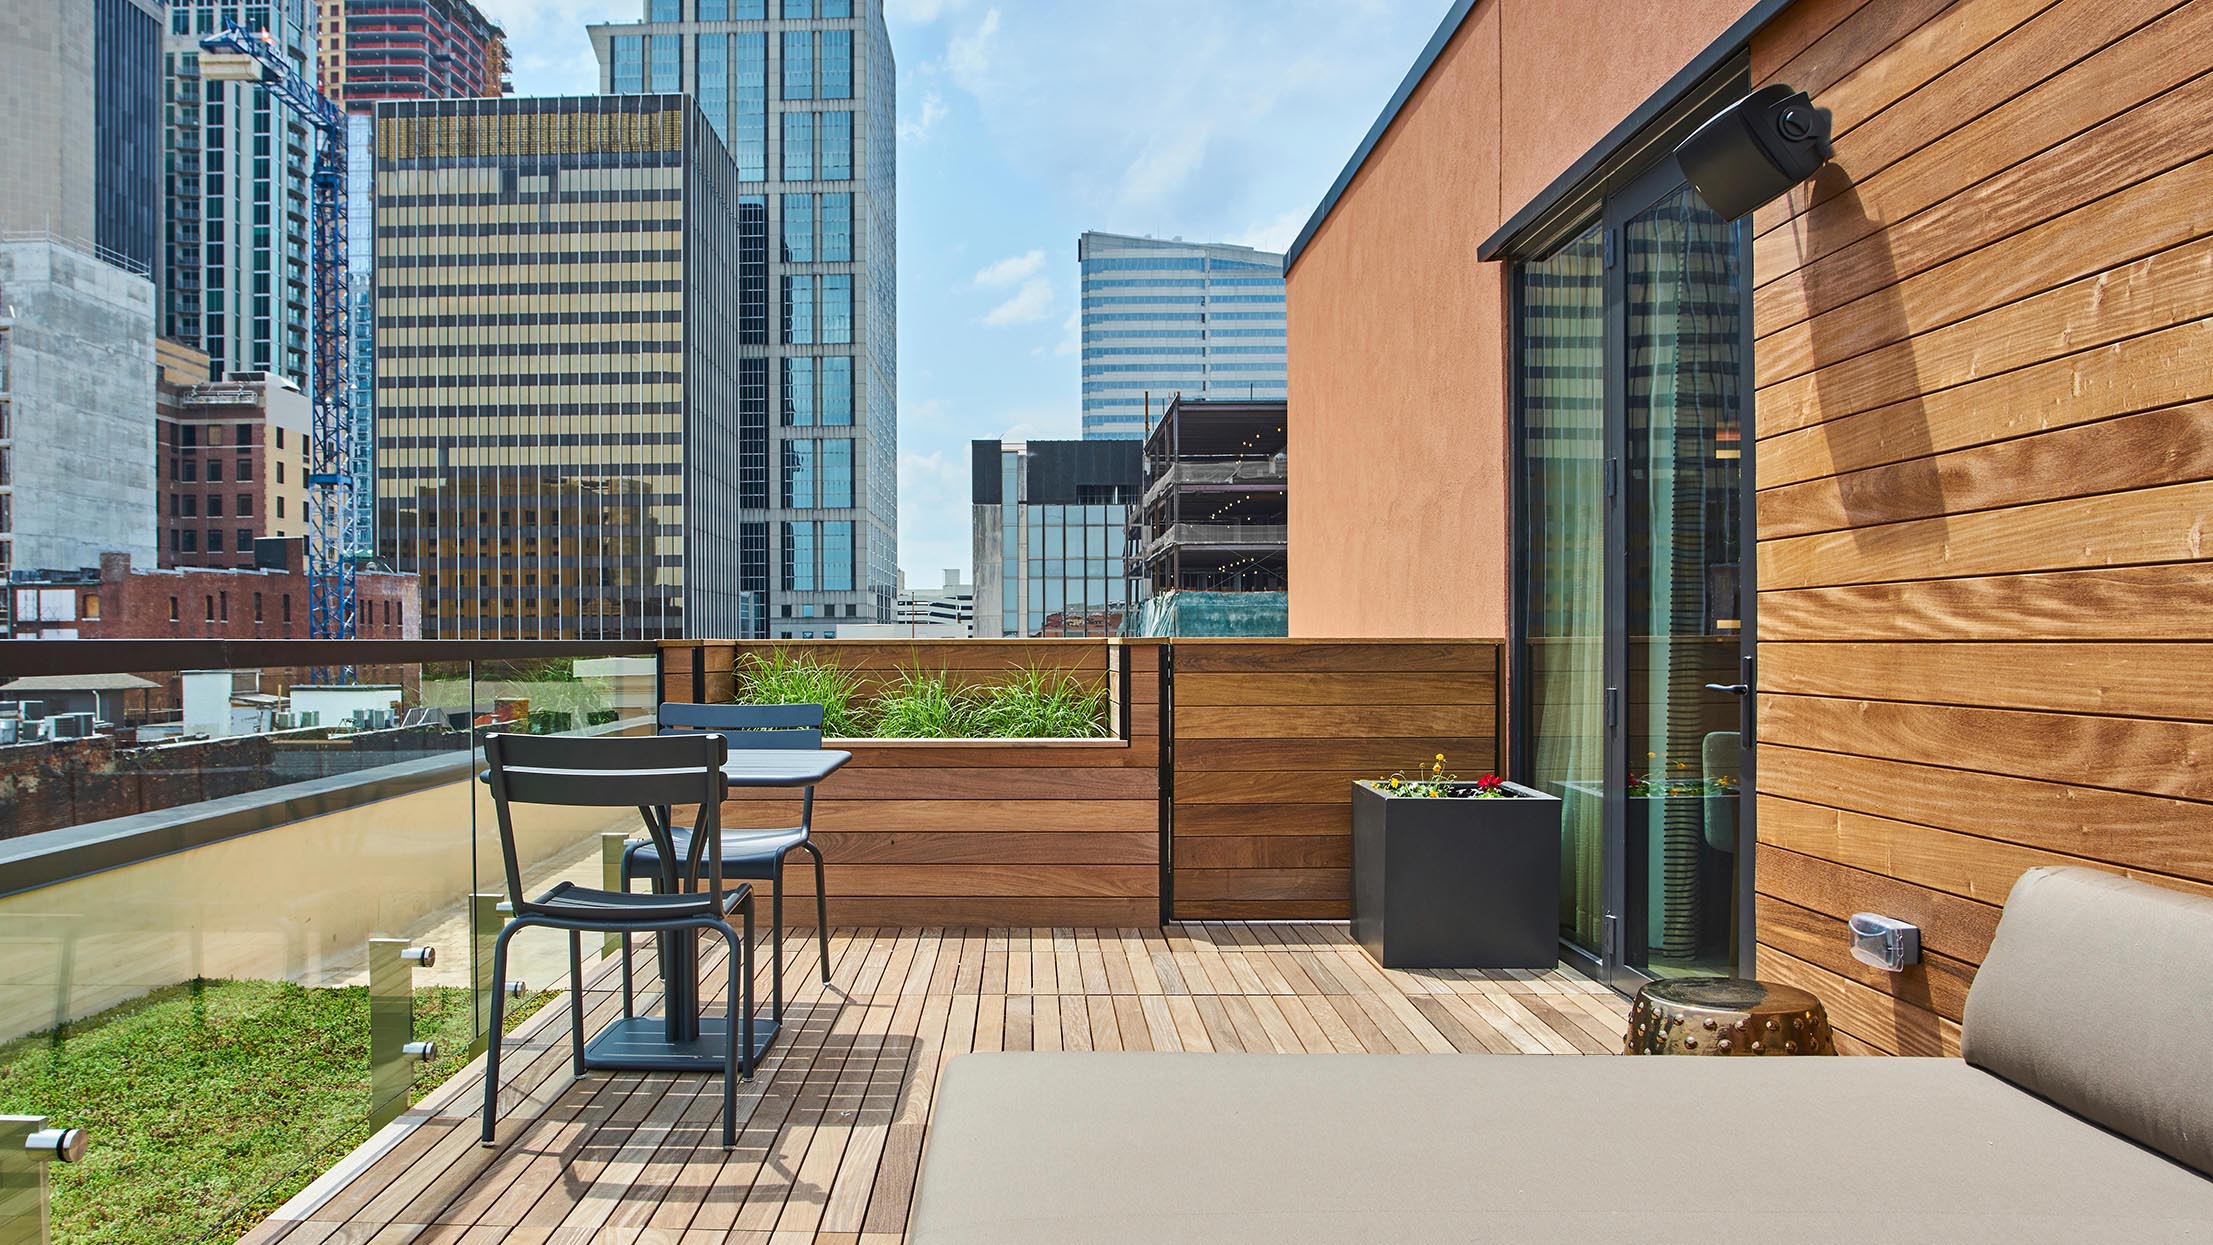 New and renovated patio at The Bankers Alley Hotel Nashville